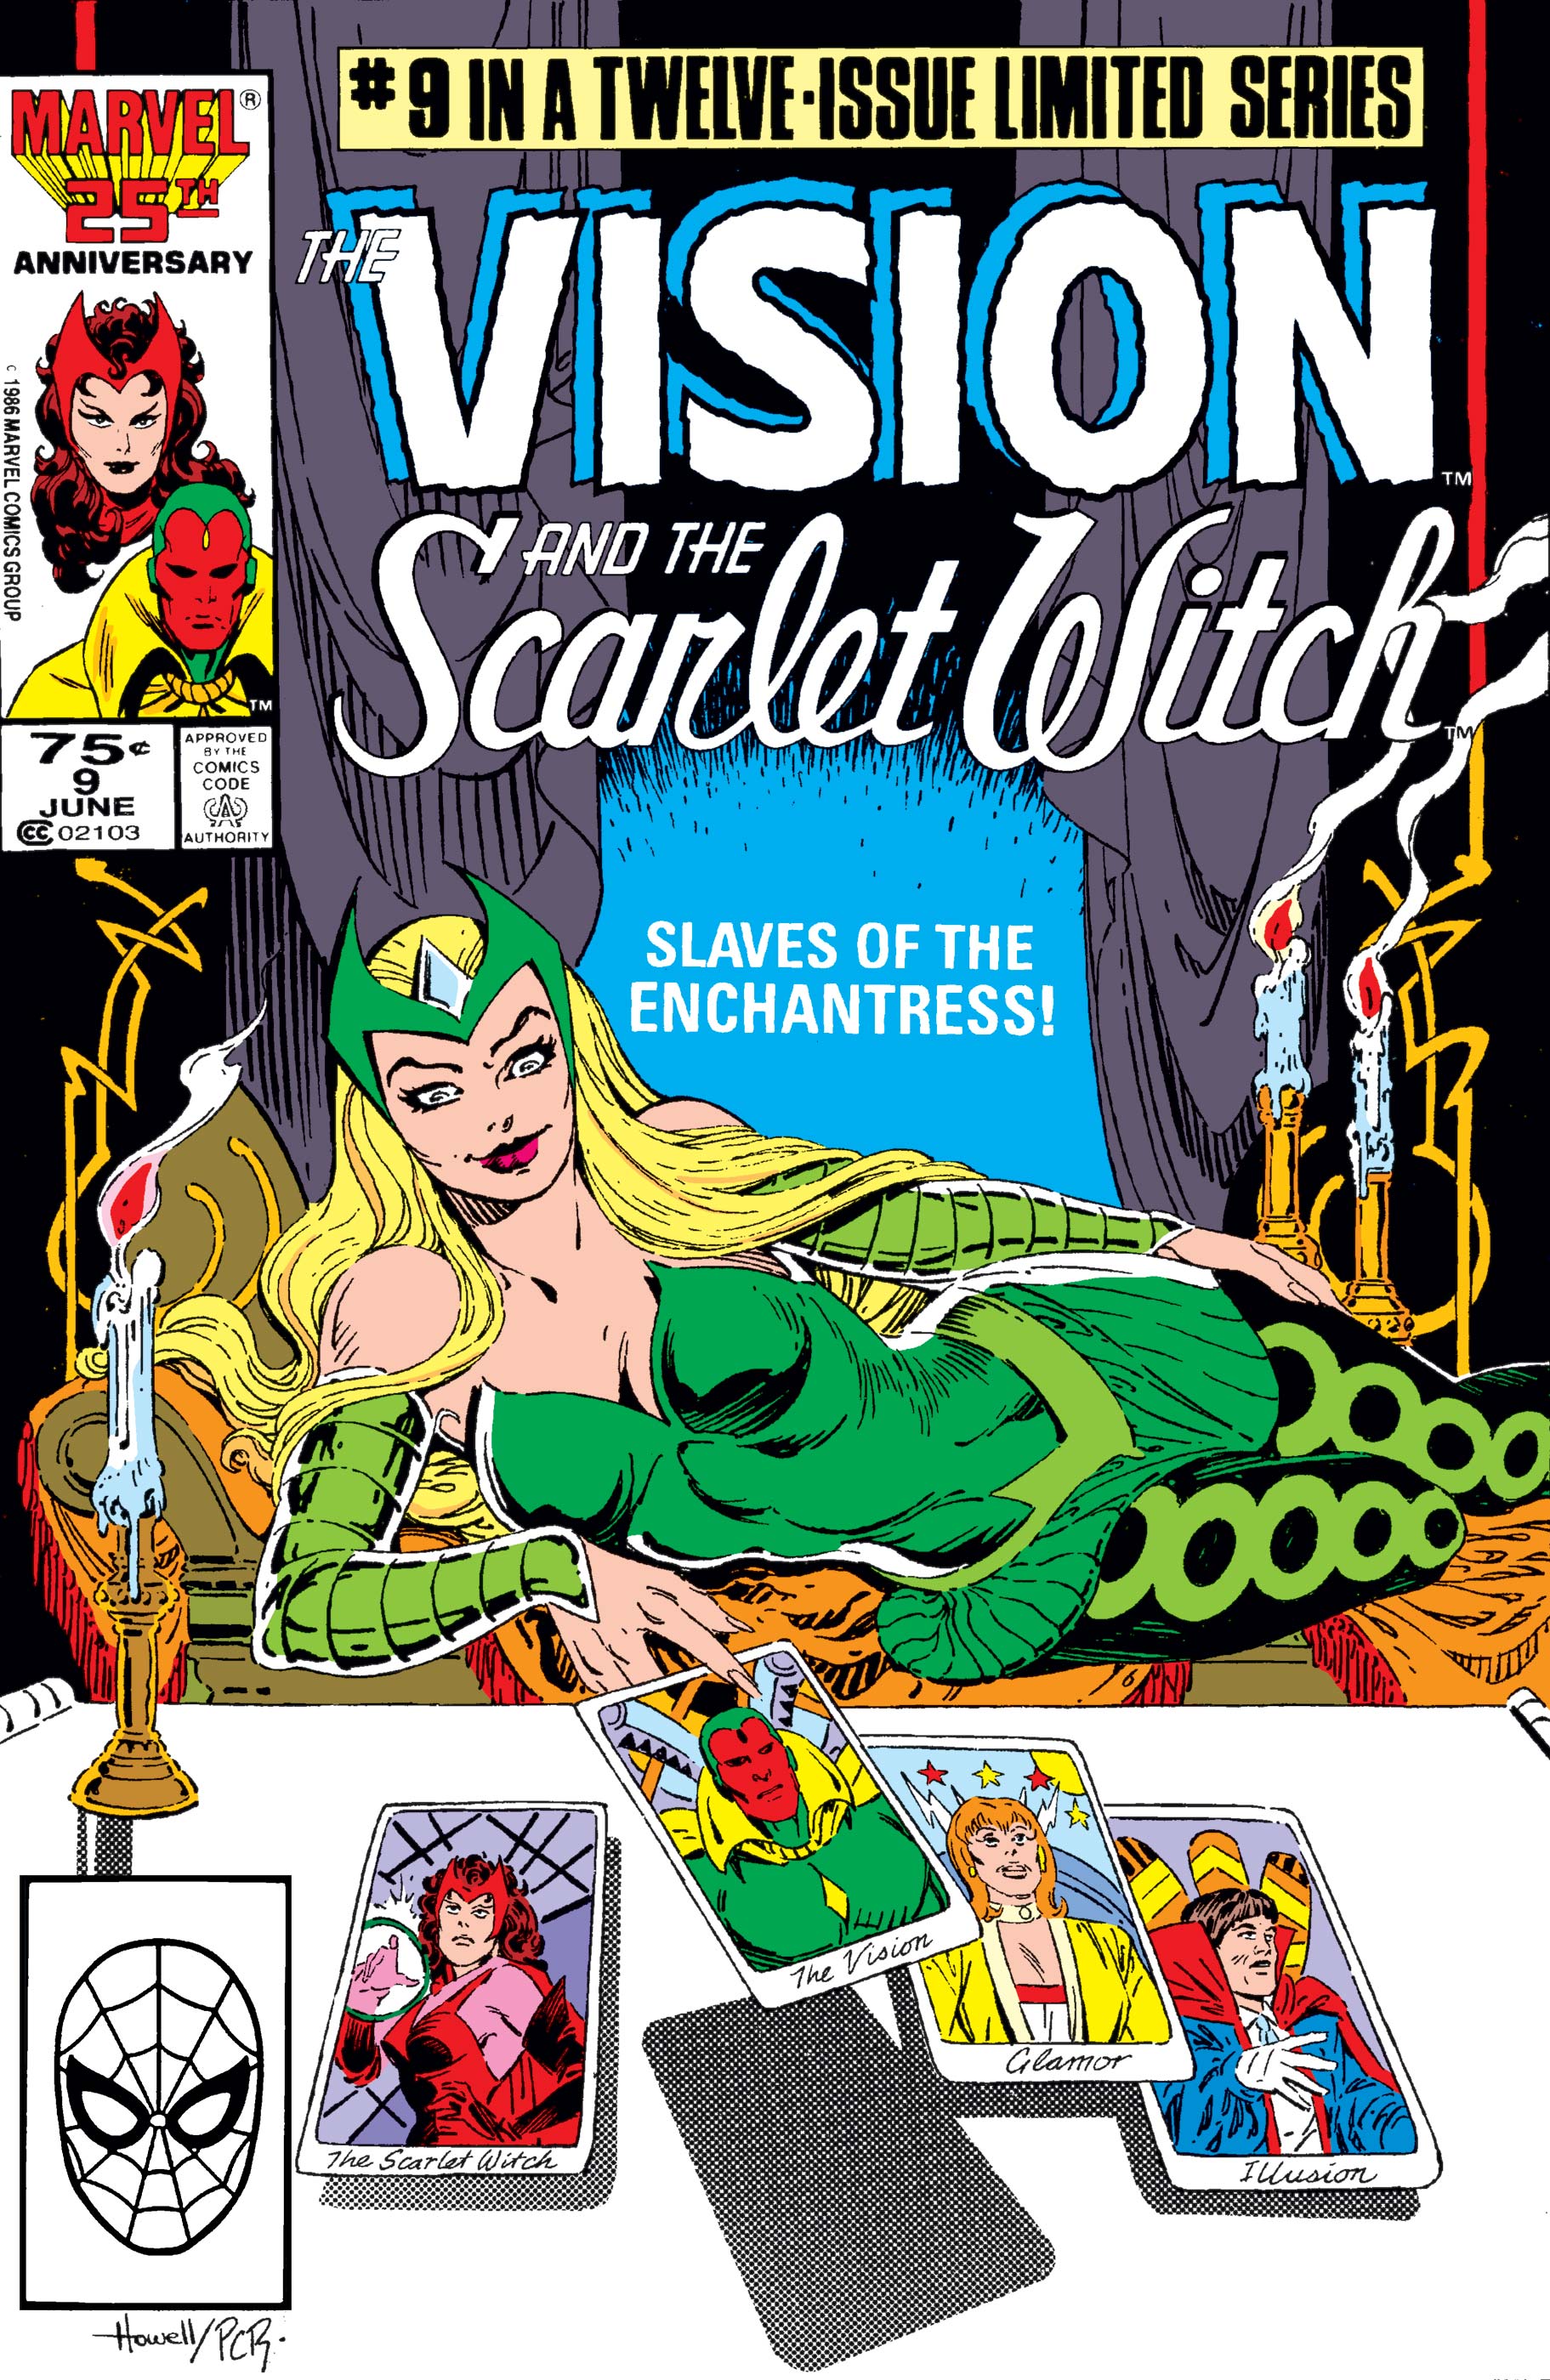 Vision and the Scarlet Witch (1985) #9